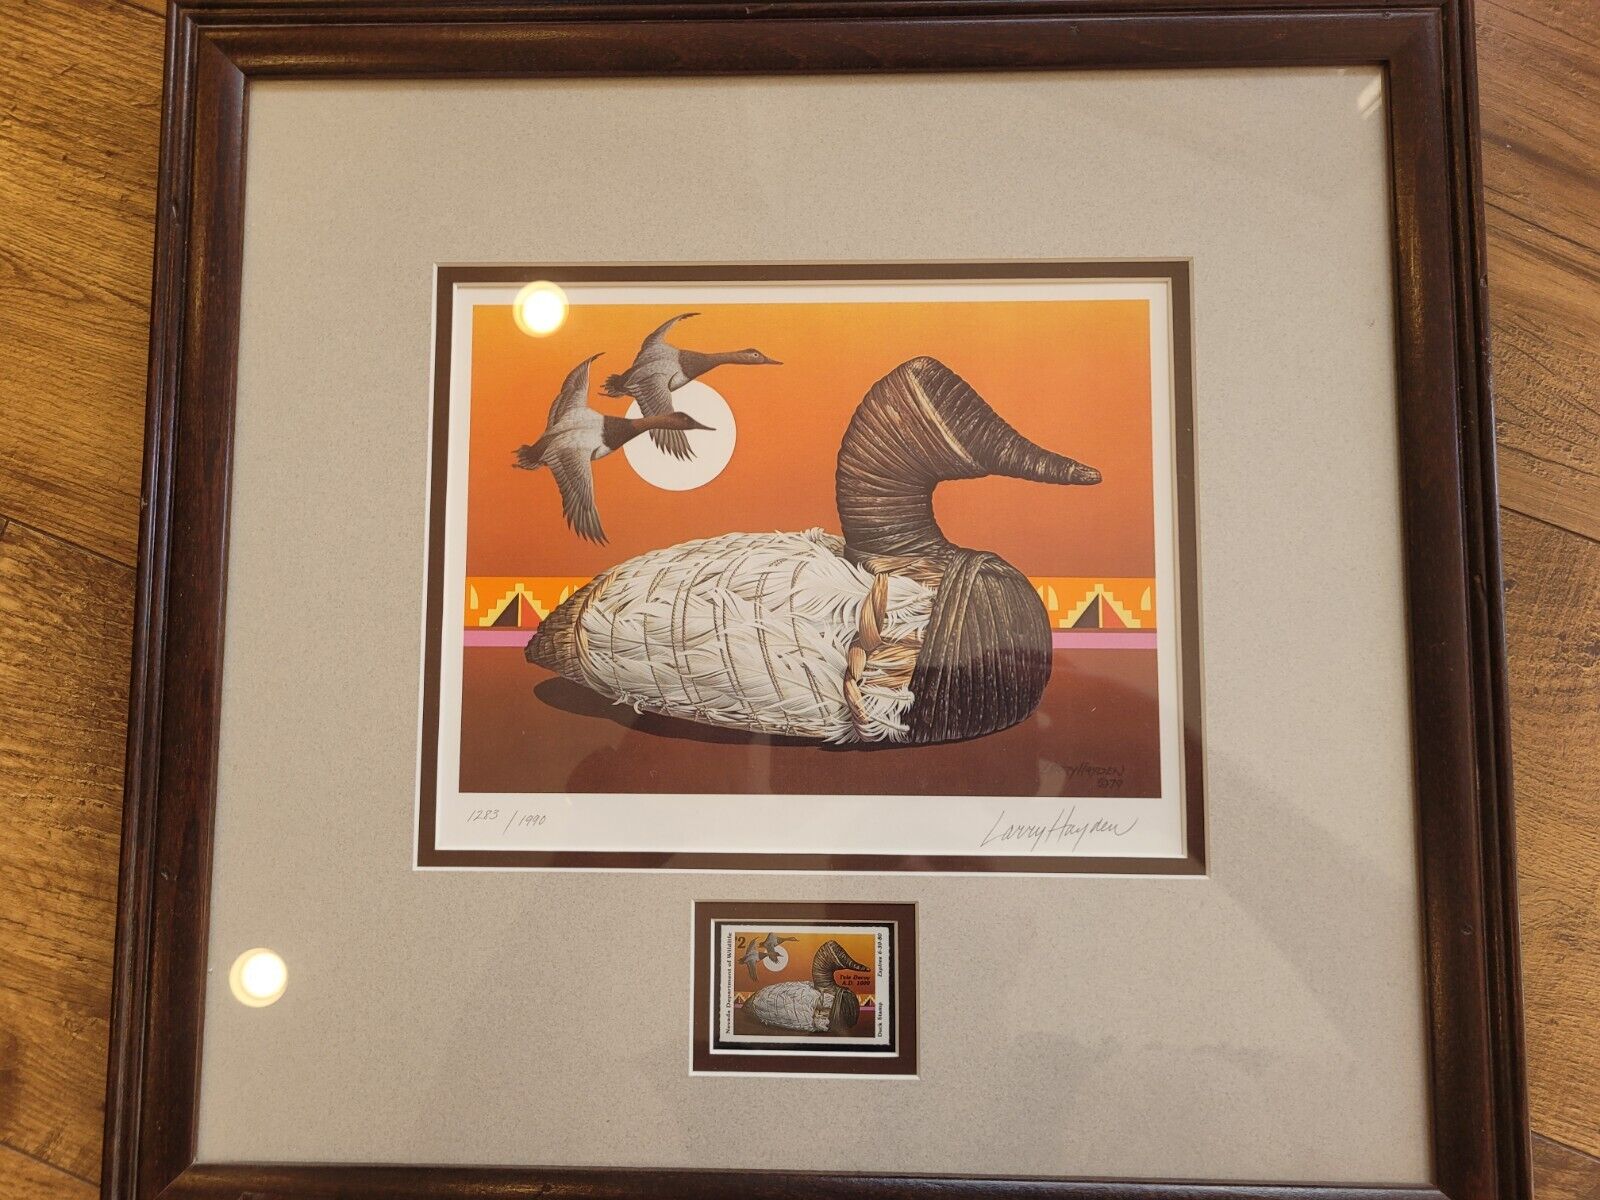 1979 Nevada First of State Duck Stamp and Print Signed Larry Hayden 1283/1990